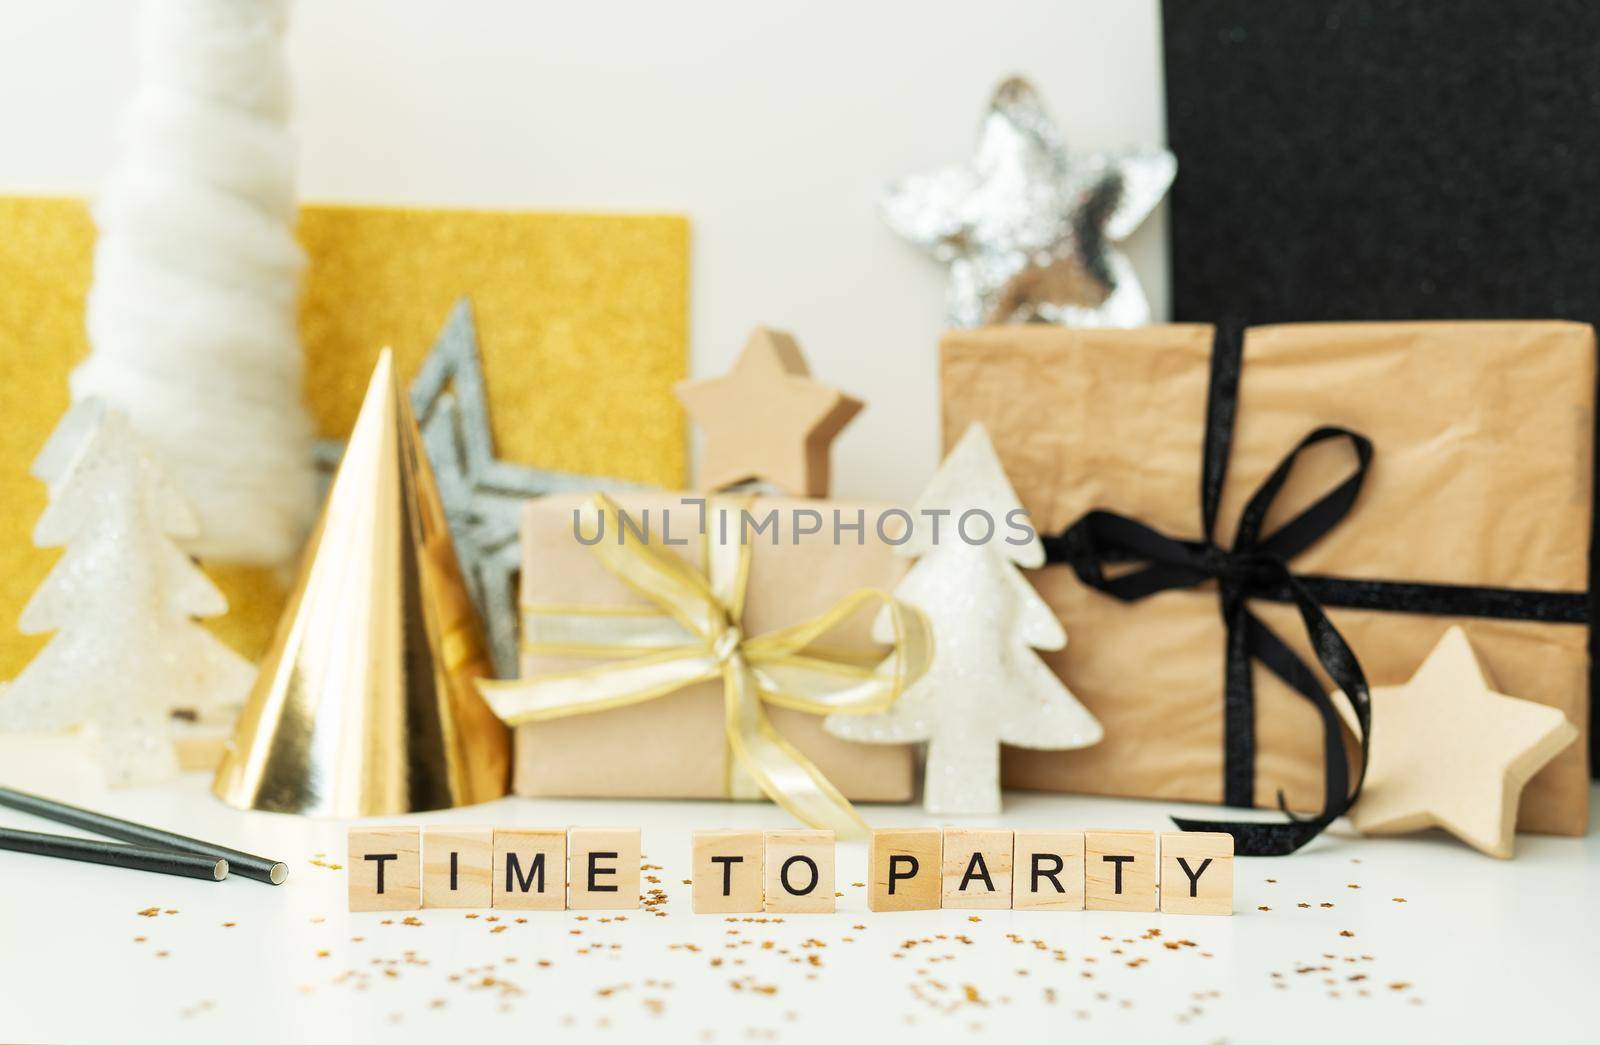 Christmas party time - confetti, gifts, tree, stars, glitter, ribbon. Party time lettering New year 2022